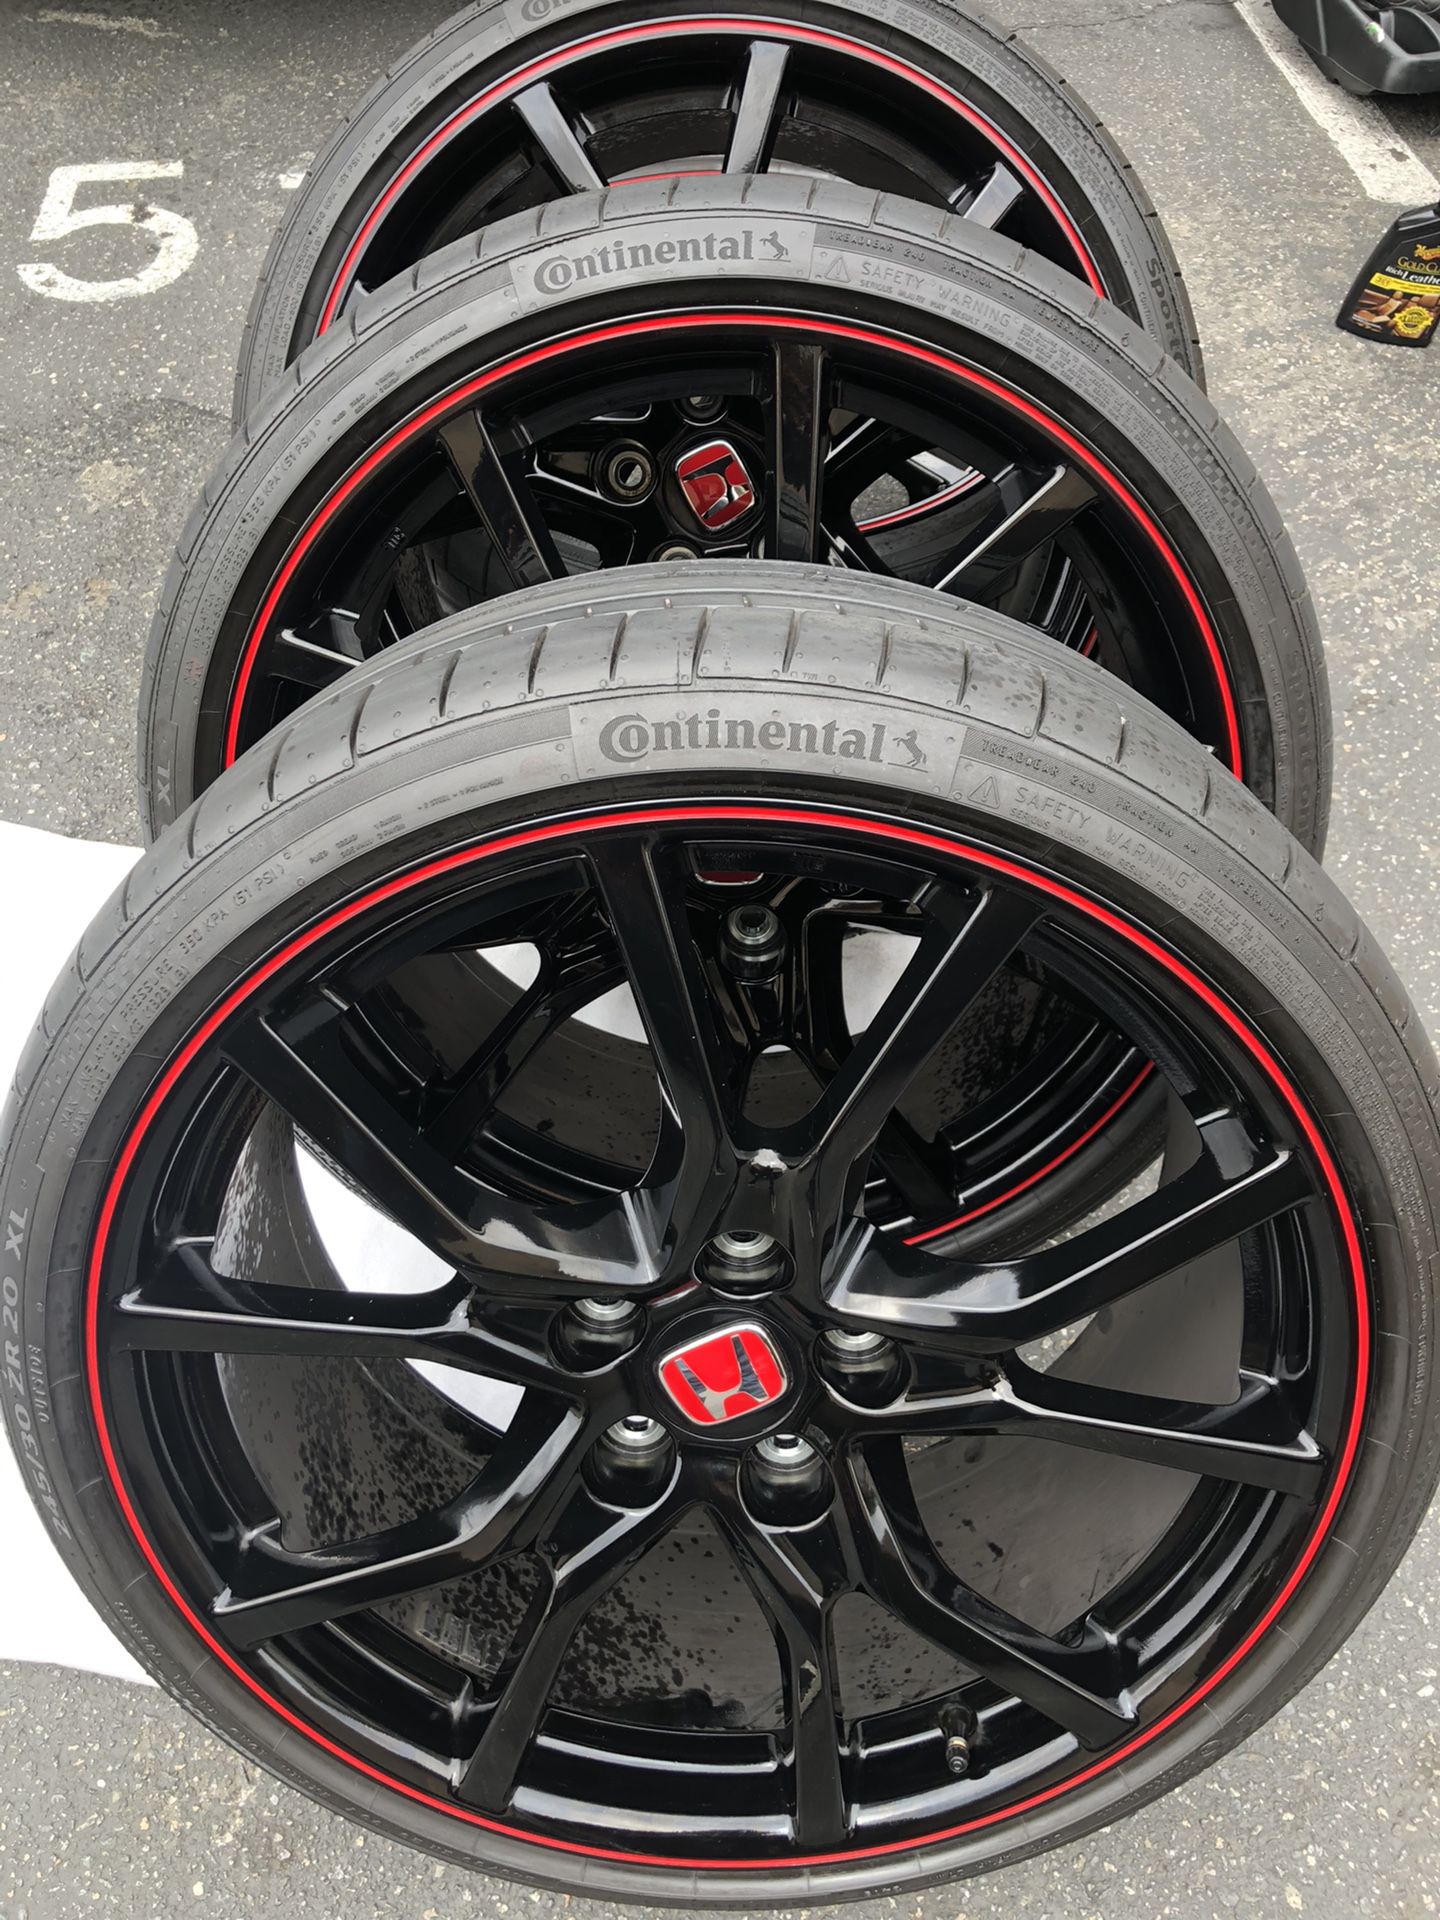 Rims tires 20x8,5 5x120 fit Honda Civic type R Acura TL brand new condition